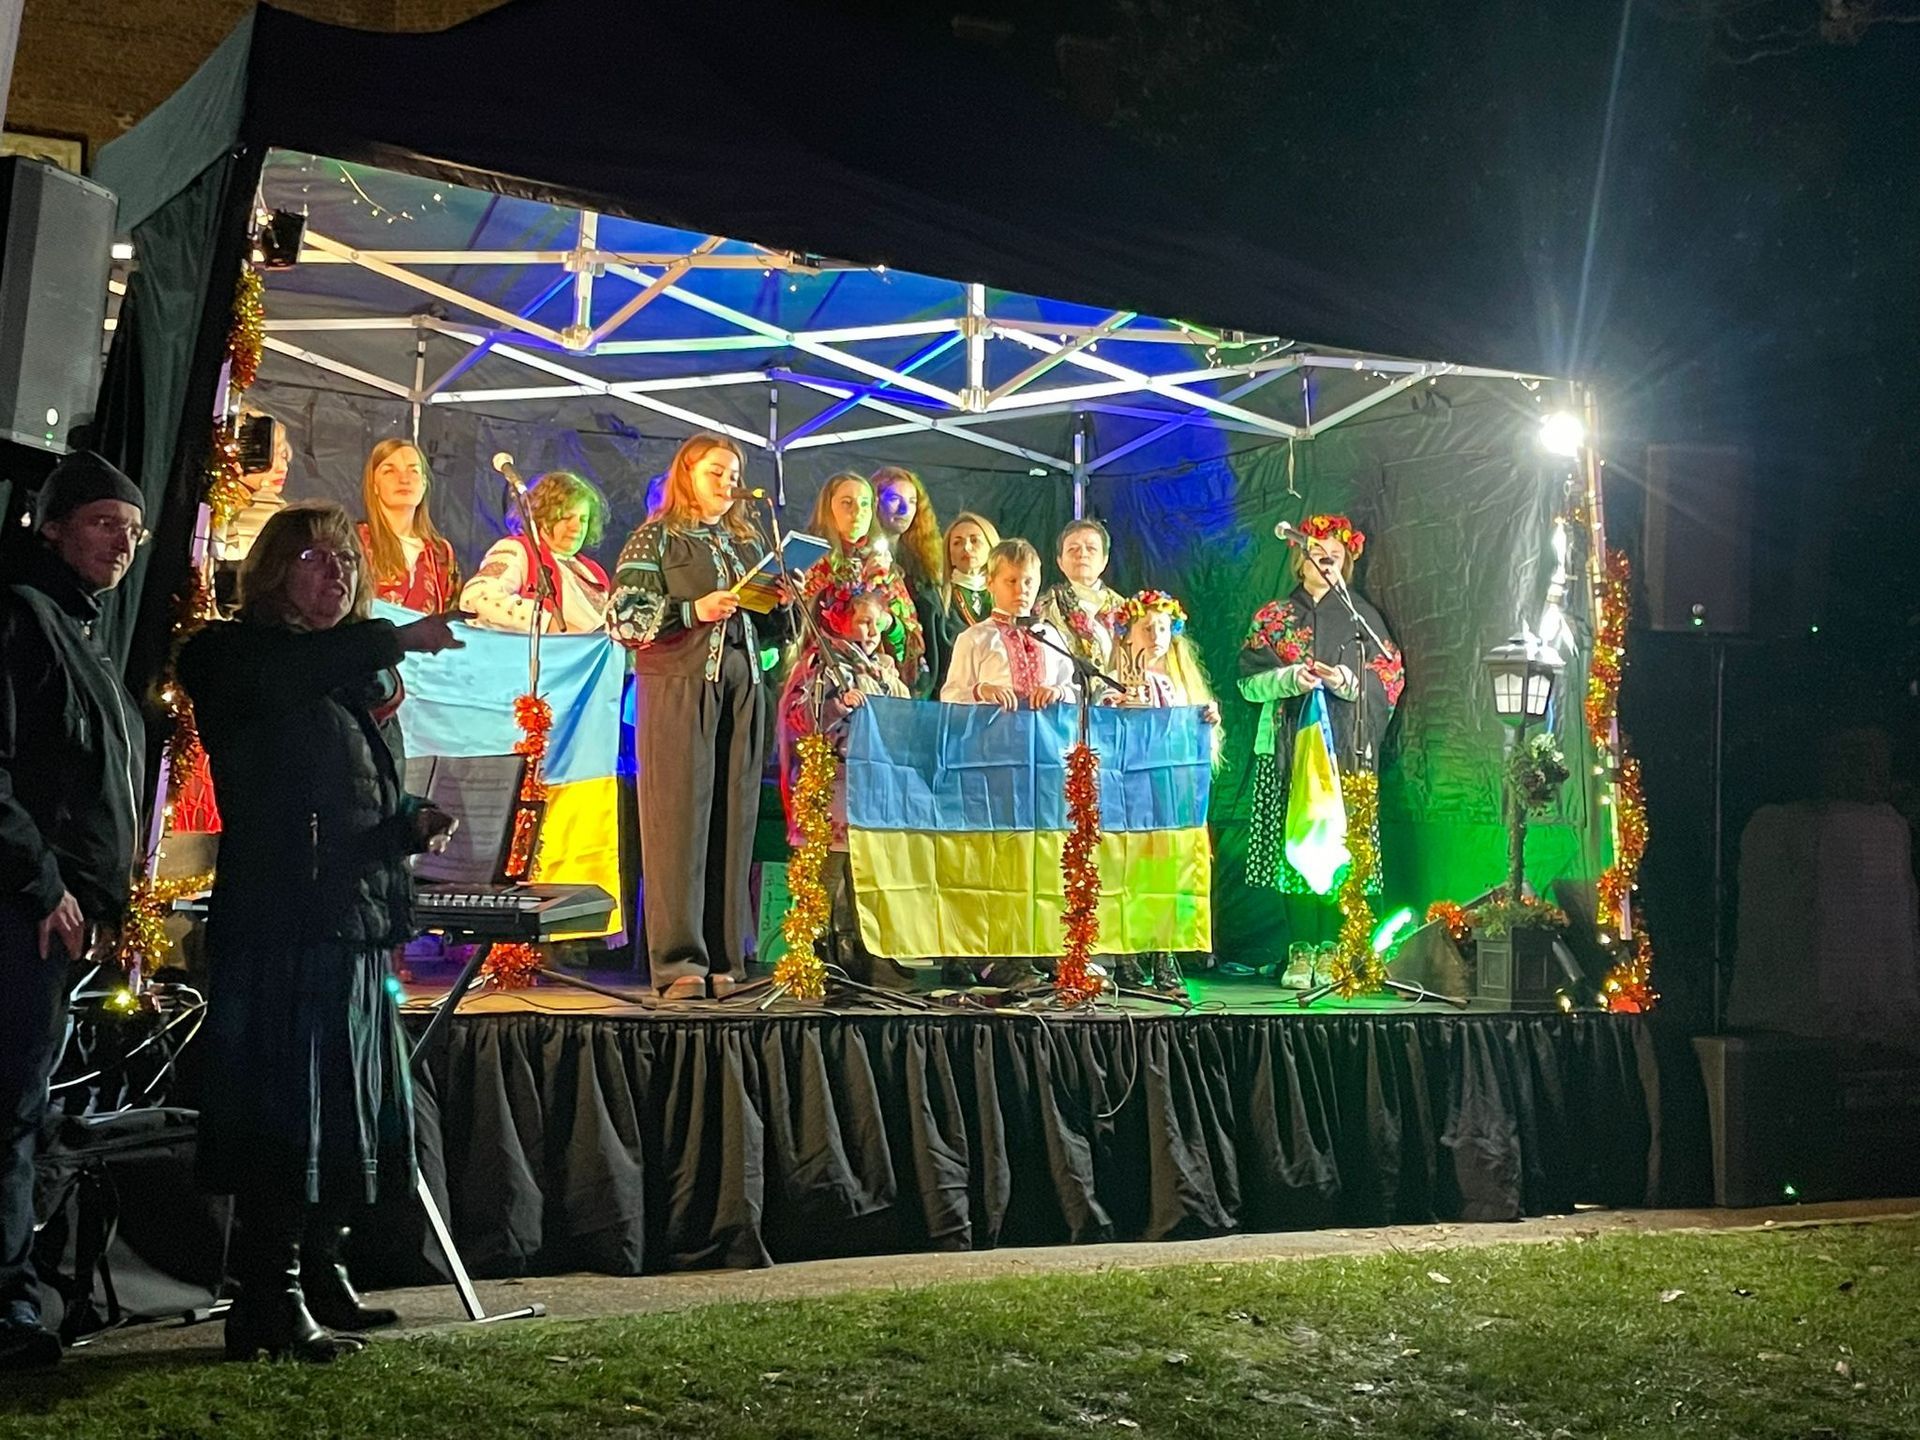 A group performing on a modular stage with festive lighting and decorations, with a black waterproof canopy whilst holding a ukrainian flag